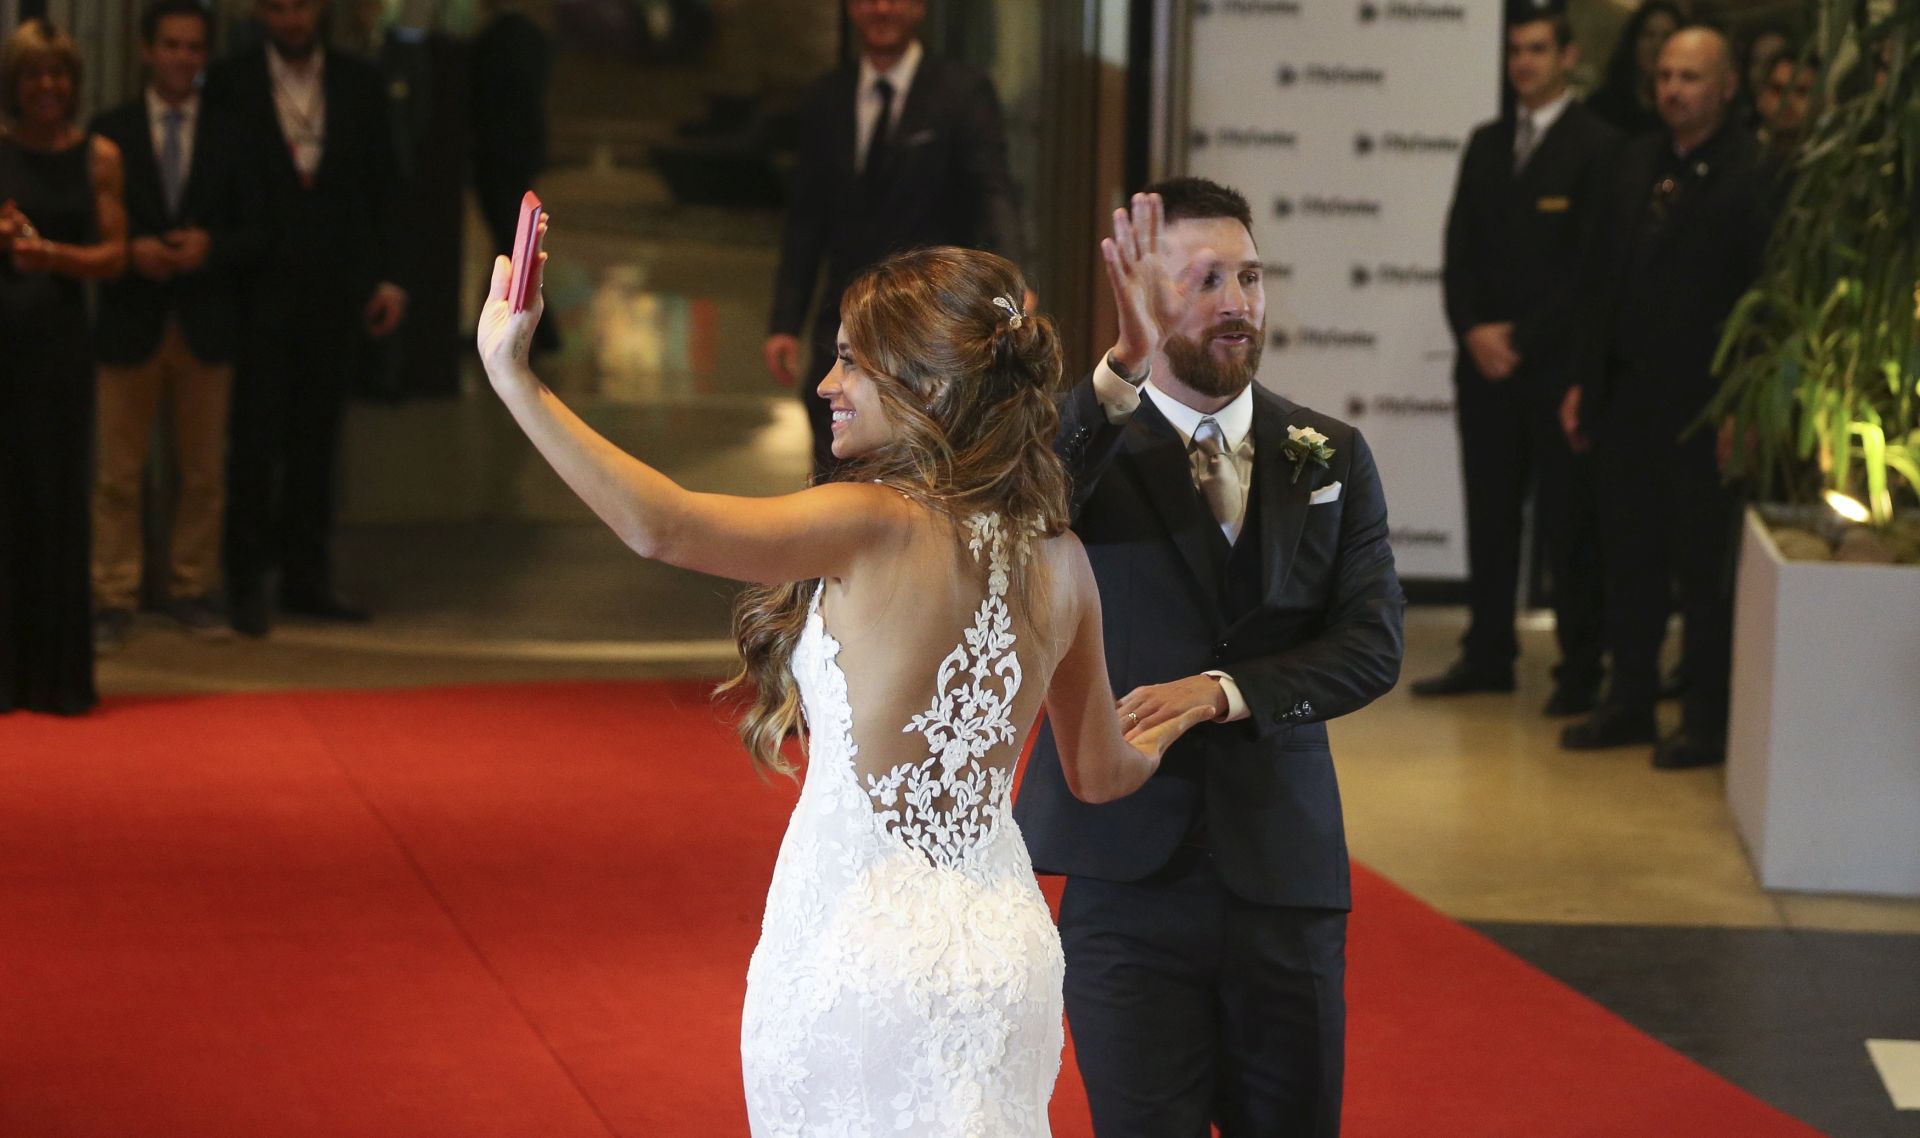 epa06058970 Argentinian soccer player Lionel Messi (L) and his wife Antonella Roccuzzo (R), wave to photographers after their wedding in Rosario, Santa Fe, Argentina, 30 June 2017.  EPA/David Fernandez